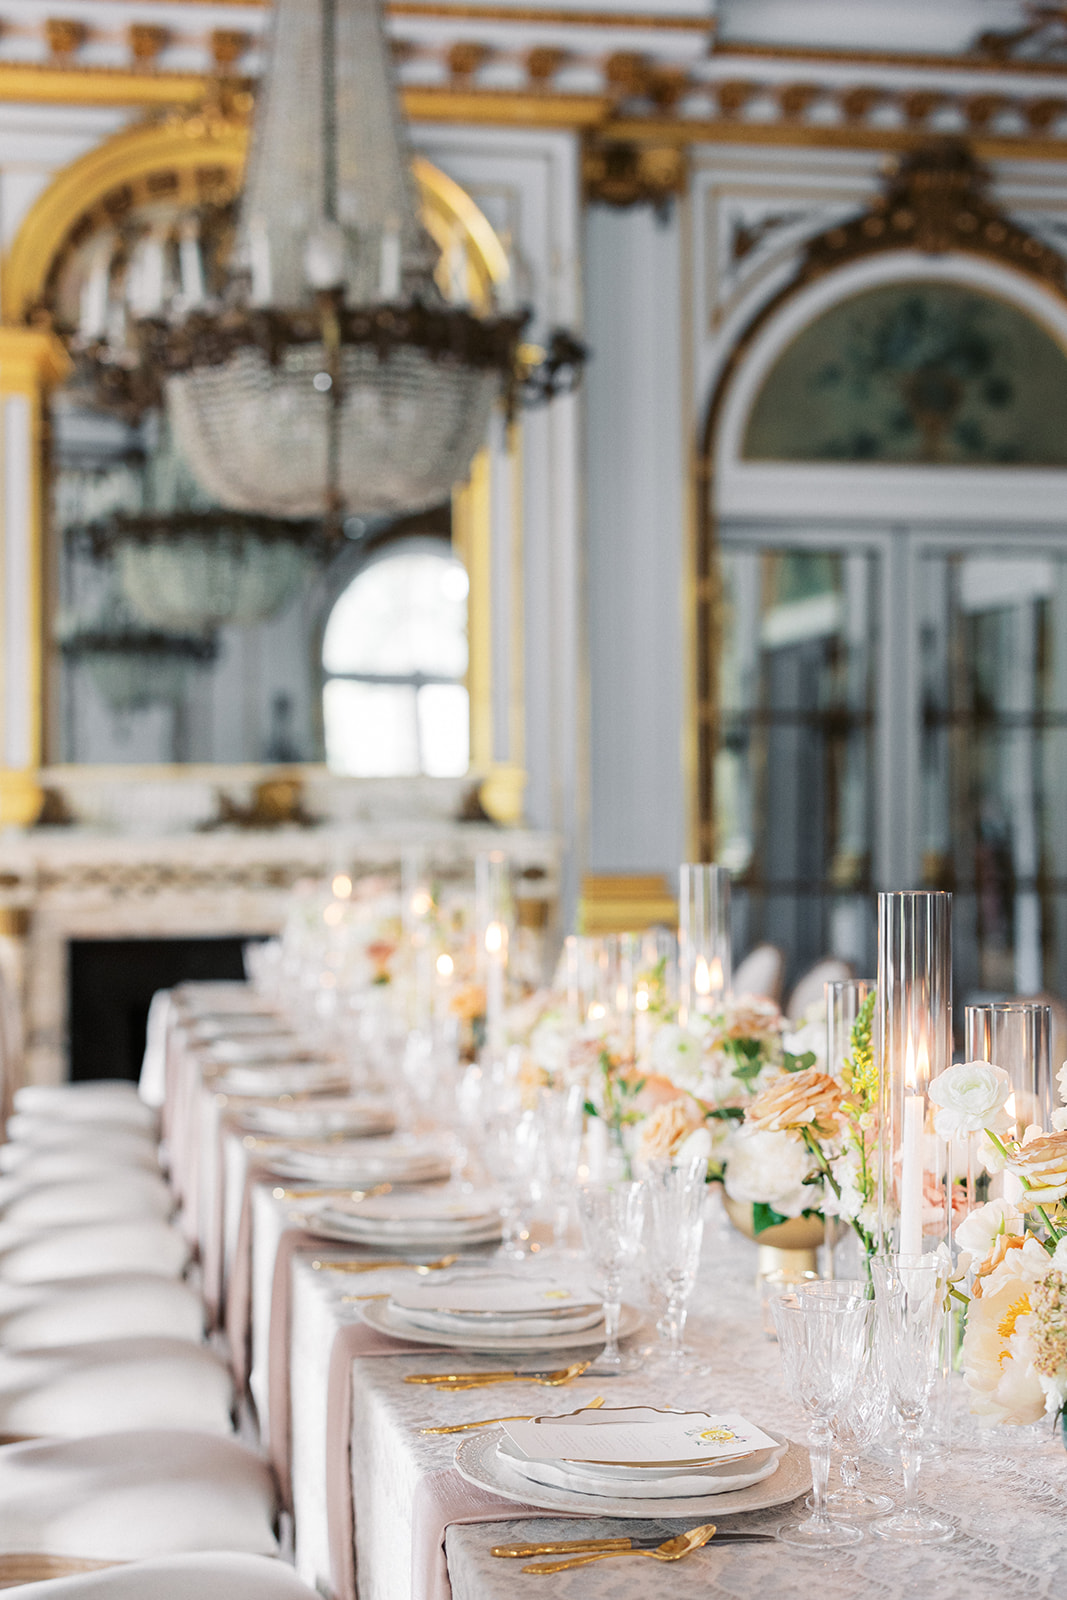 Details of a long wedding reception table with gold silverware